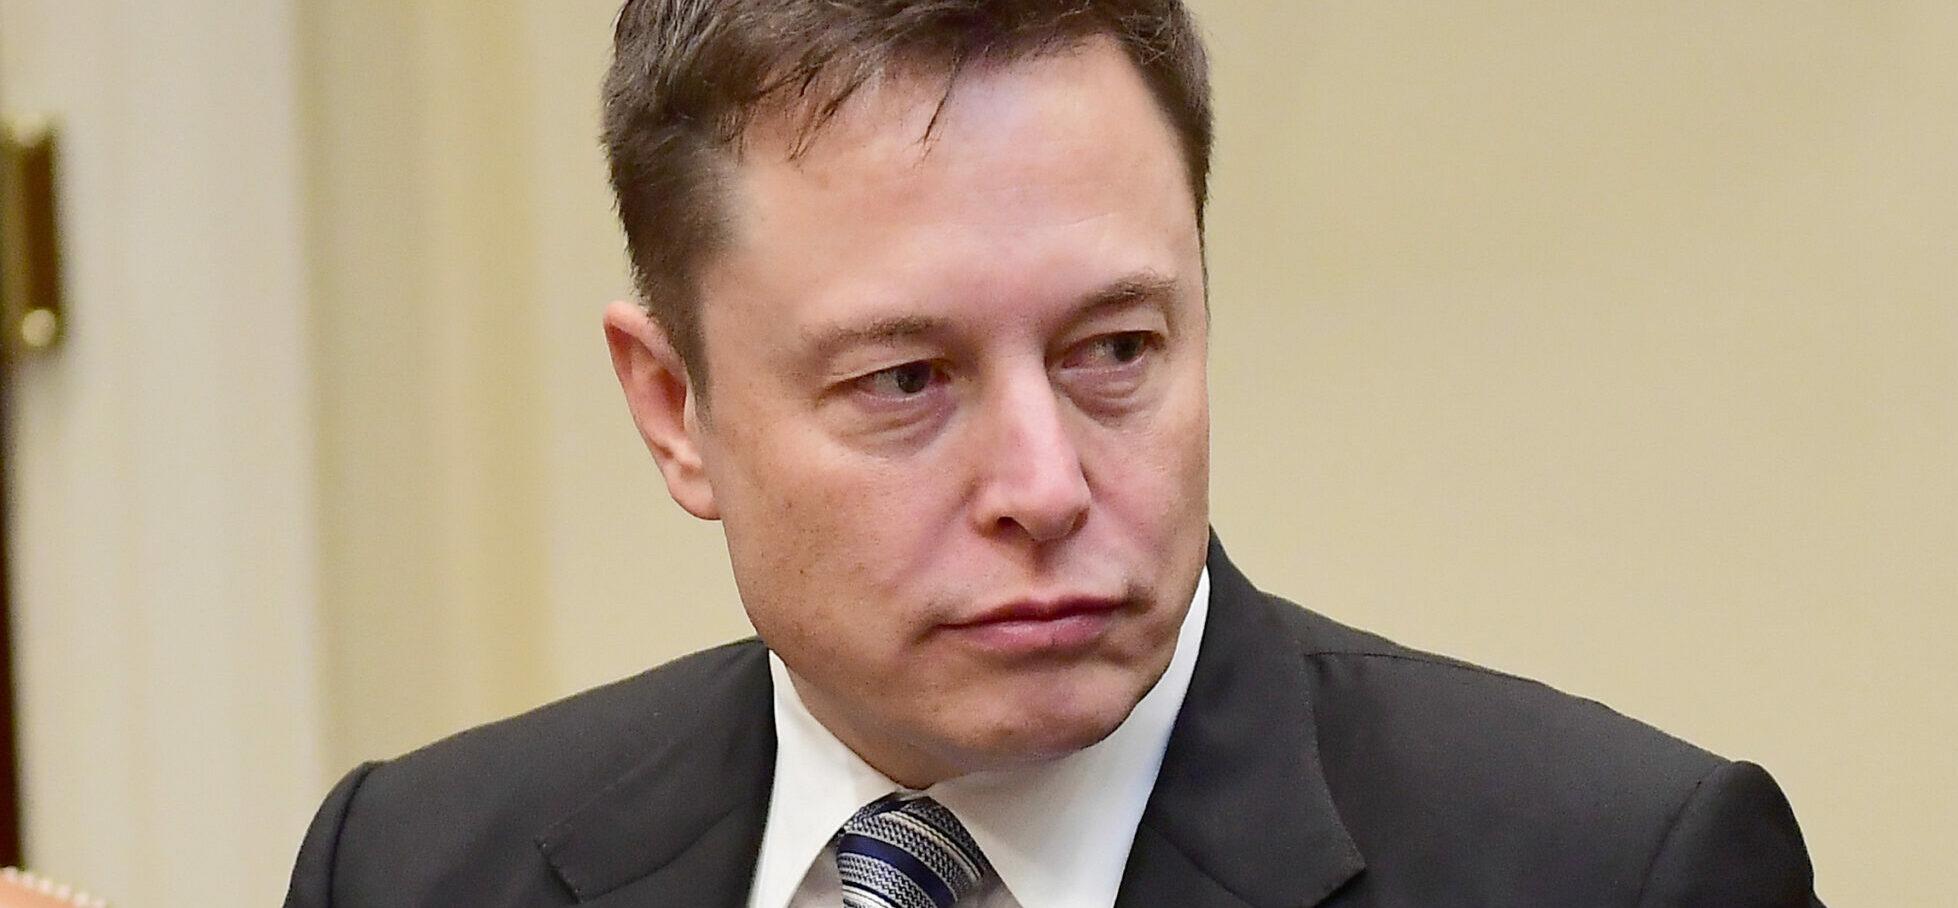 Elon Musk of Space X listens as United States President Donald Trump makes remarks during a breakfast and listening session with key business leaders in the Roosevelt Room of the White House in Washington, DC on Monday, January 23, 2017.